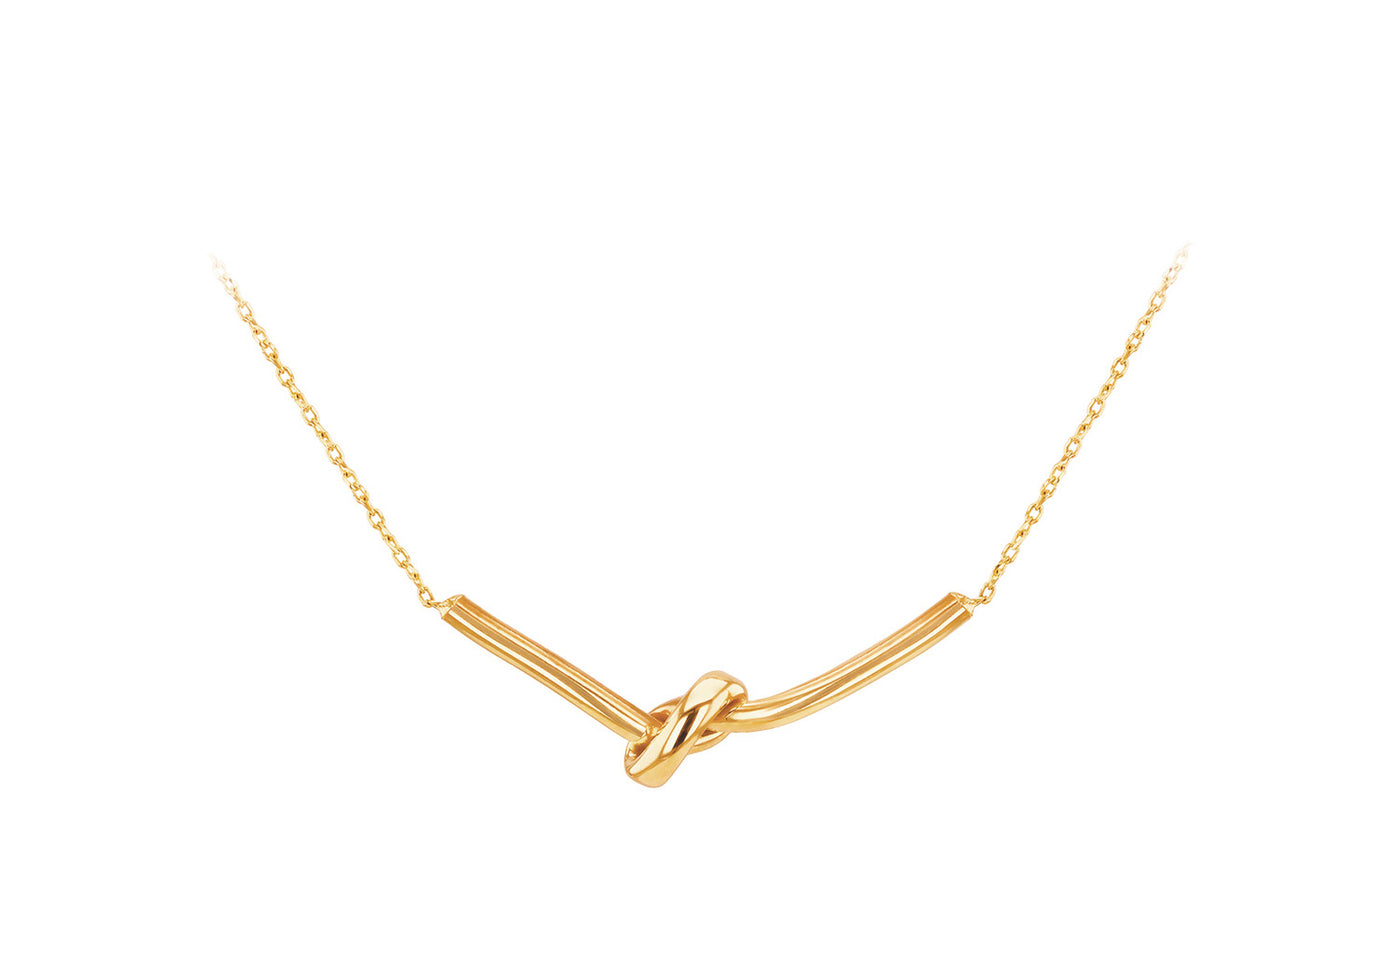 9 Carat Yellow Gold Knotted Bar Pendant On 9 Carat 43Cm Chain